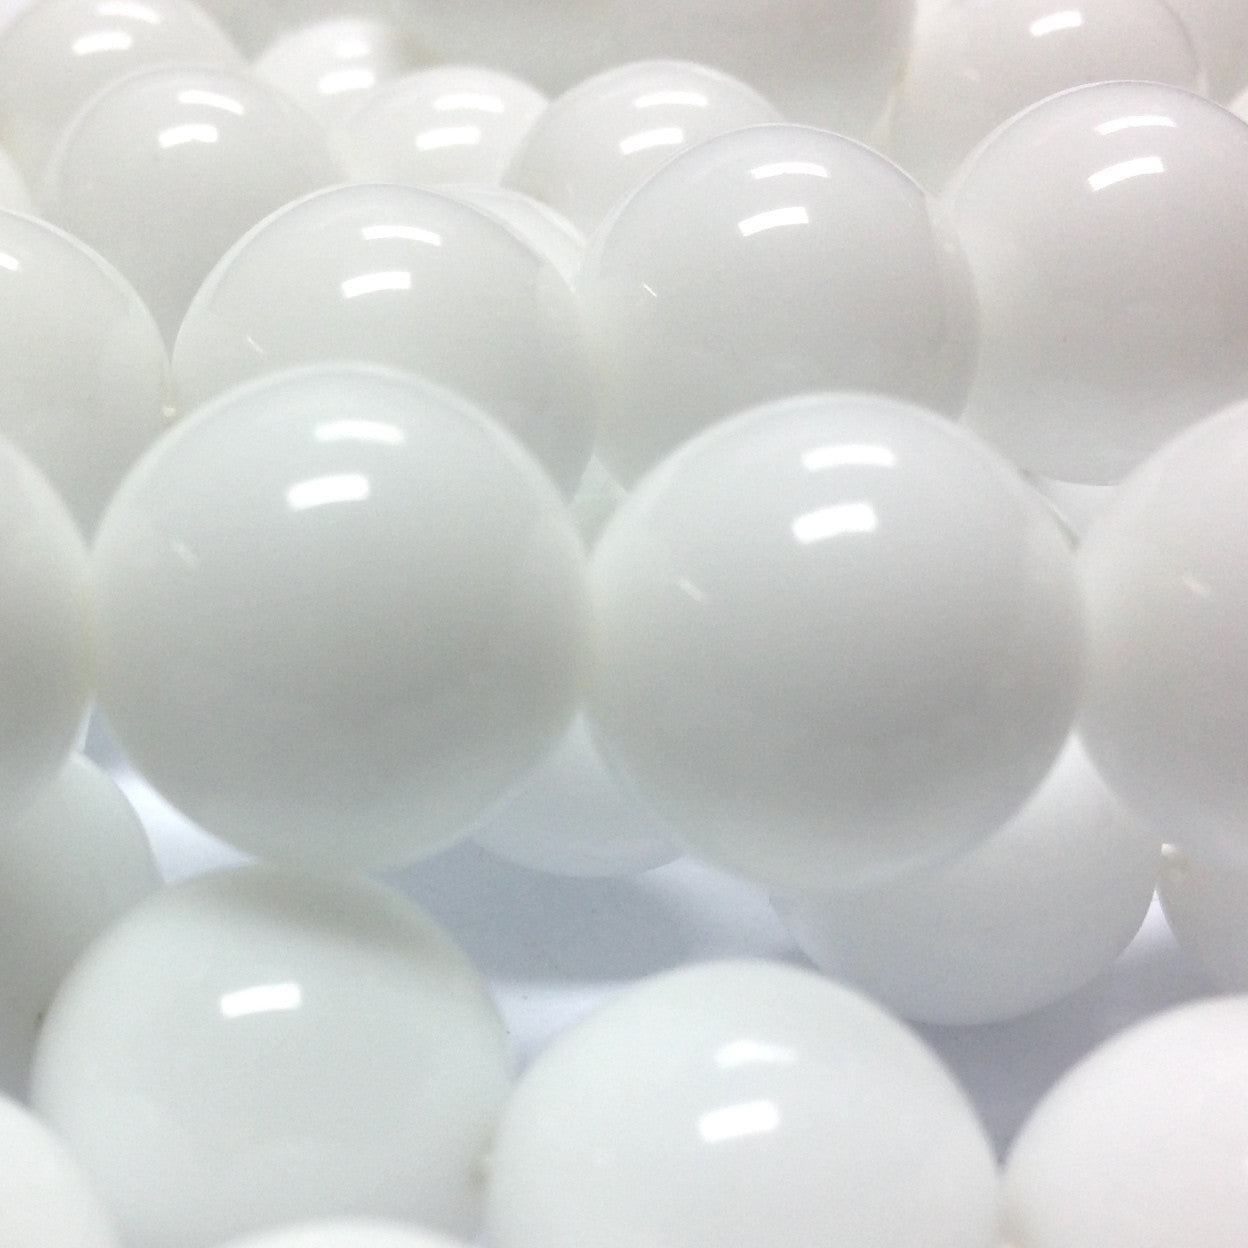 14MM White Glass Round Beads (100 pieces)